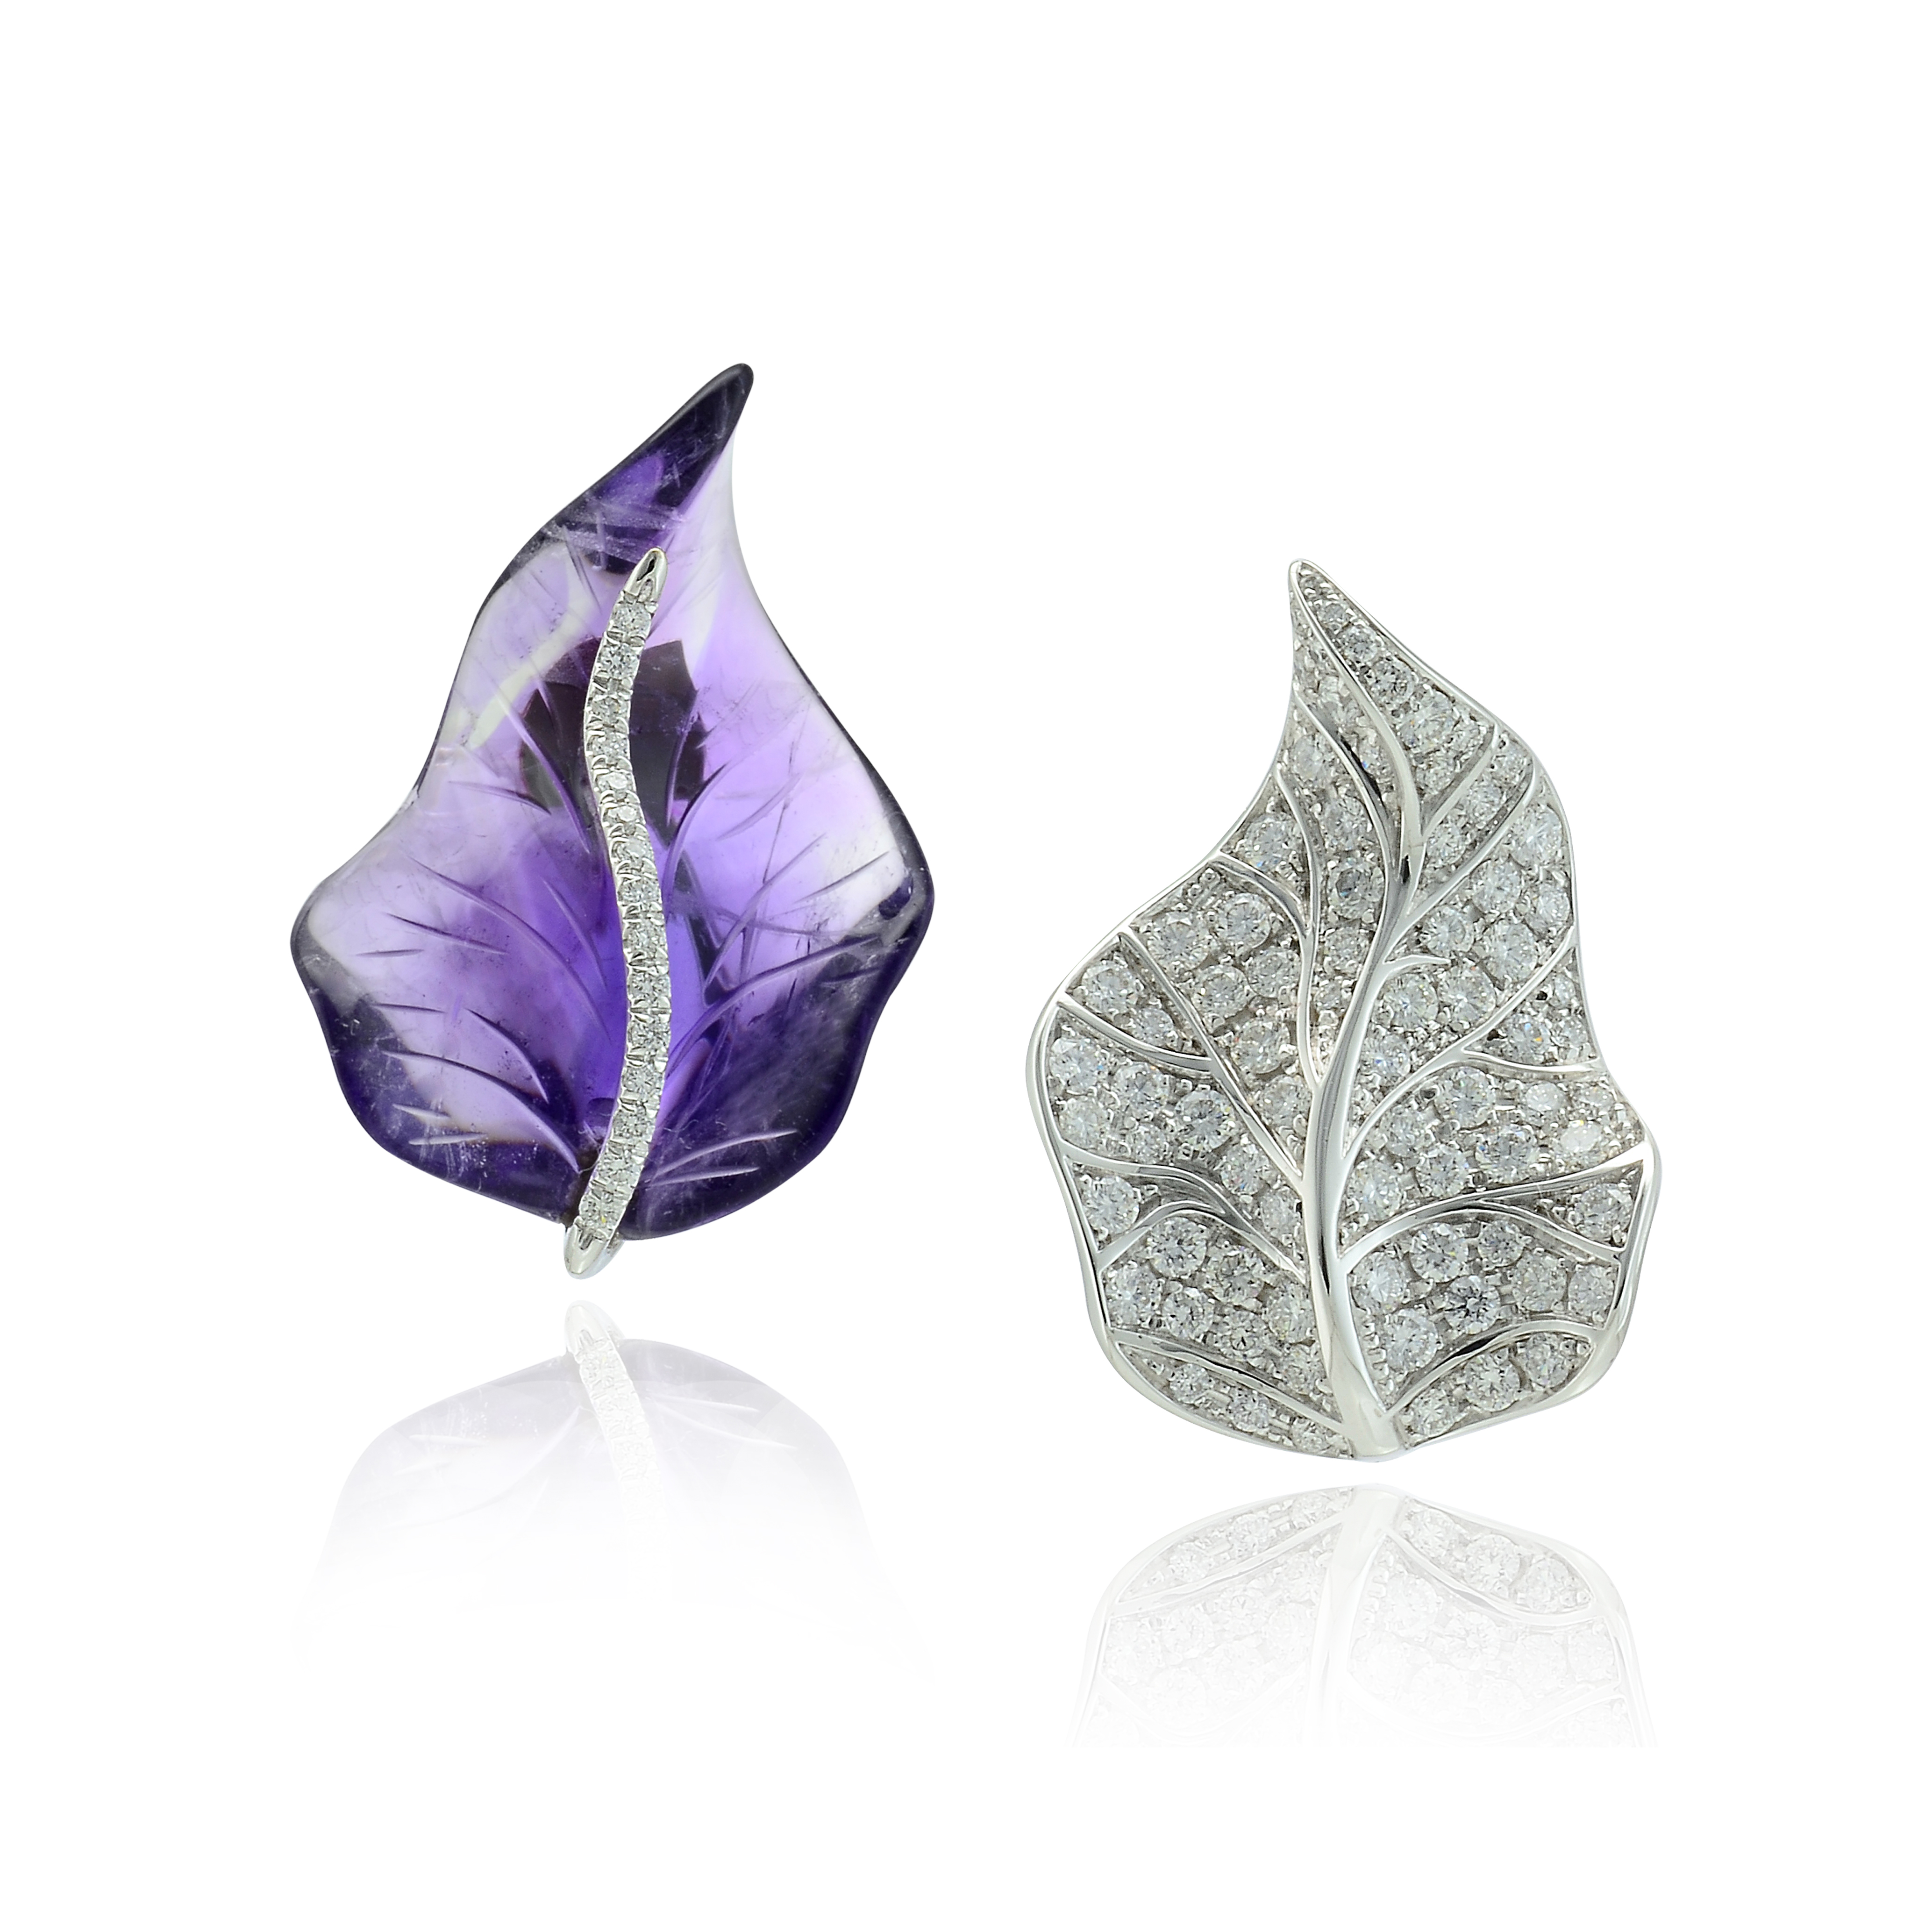 Only for you earrings set in white gold with carved amethyst and diamonds, Margherita Burgener